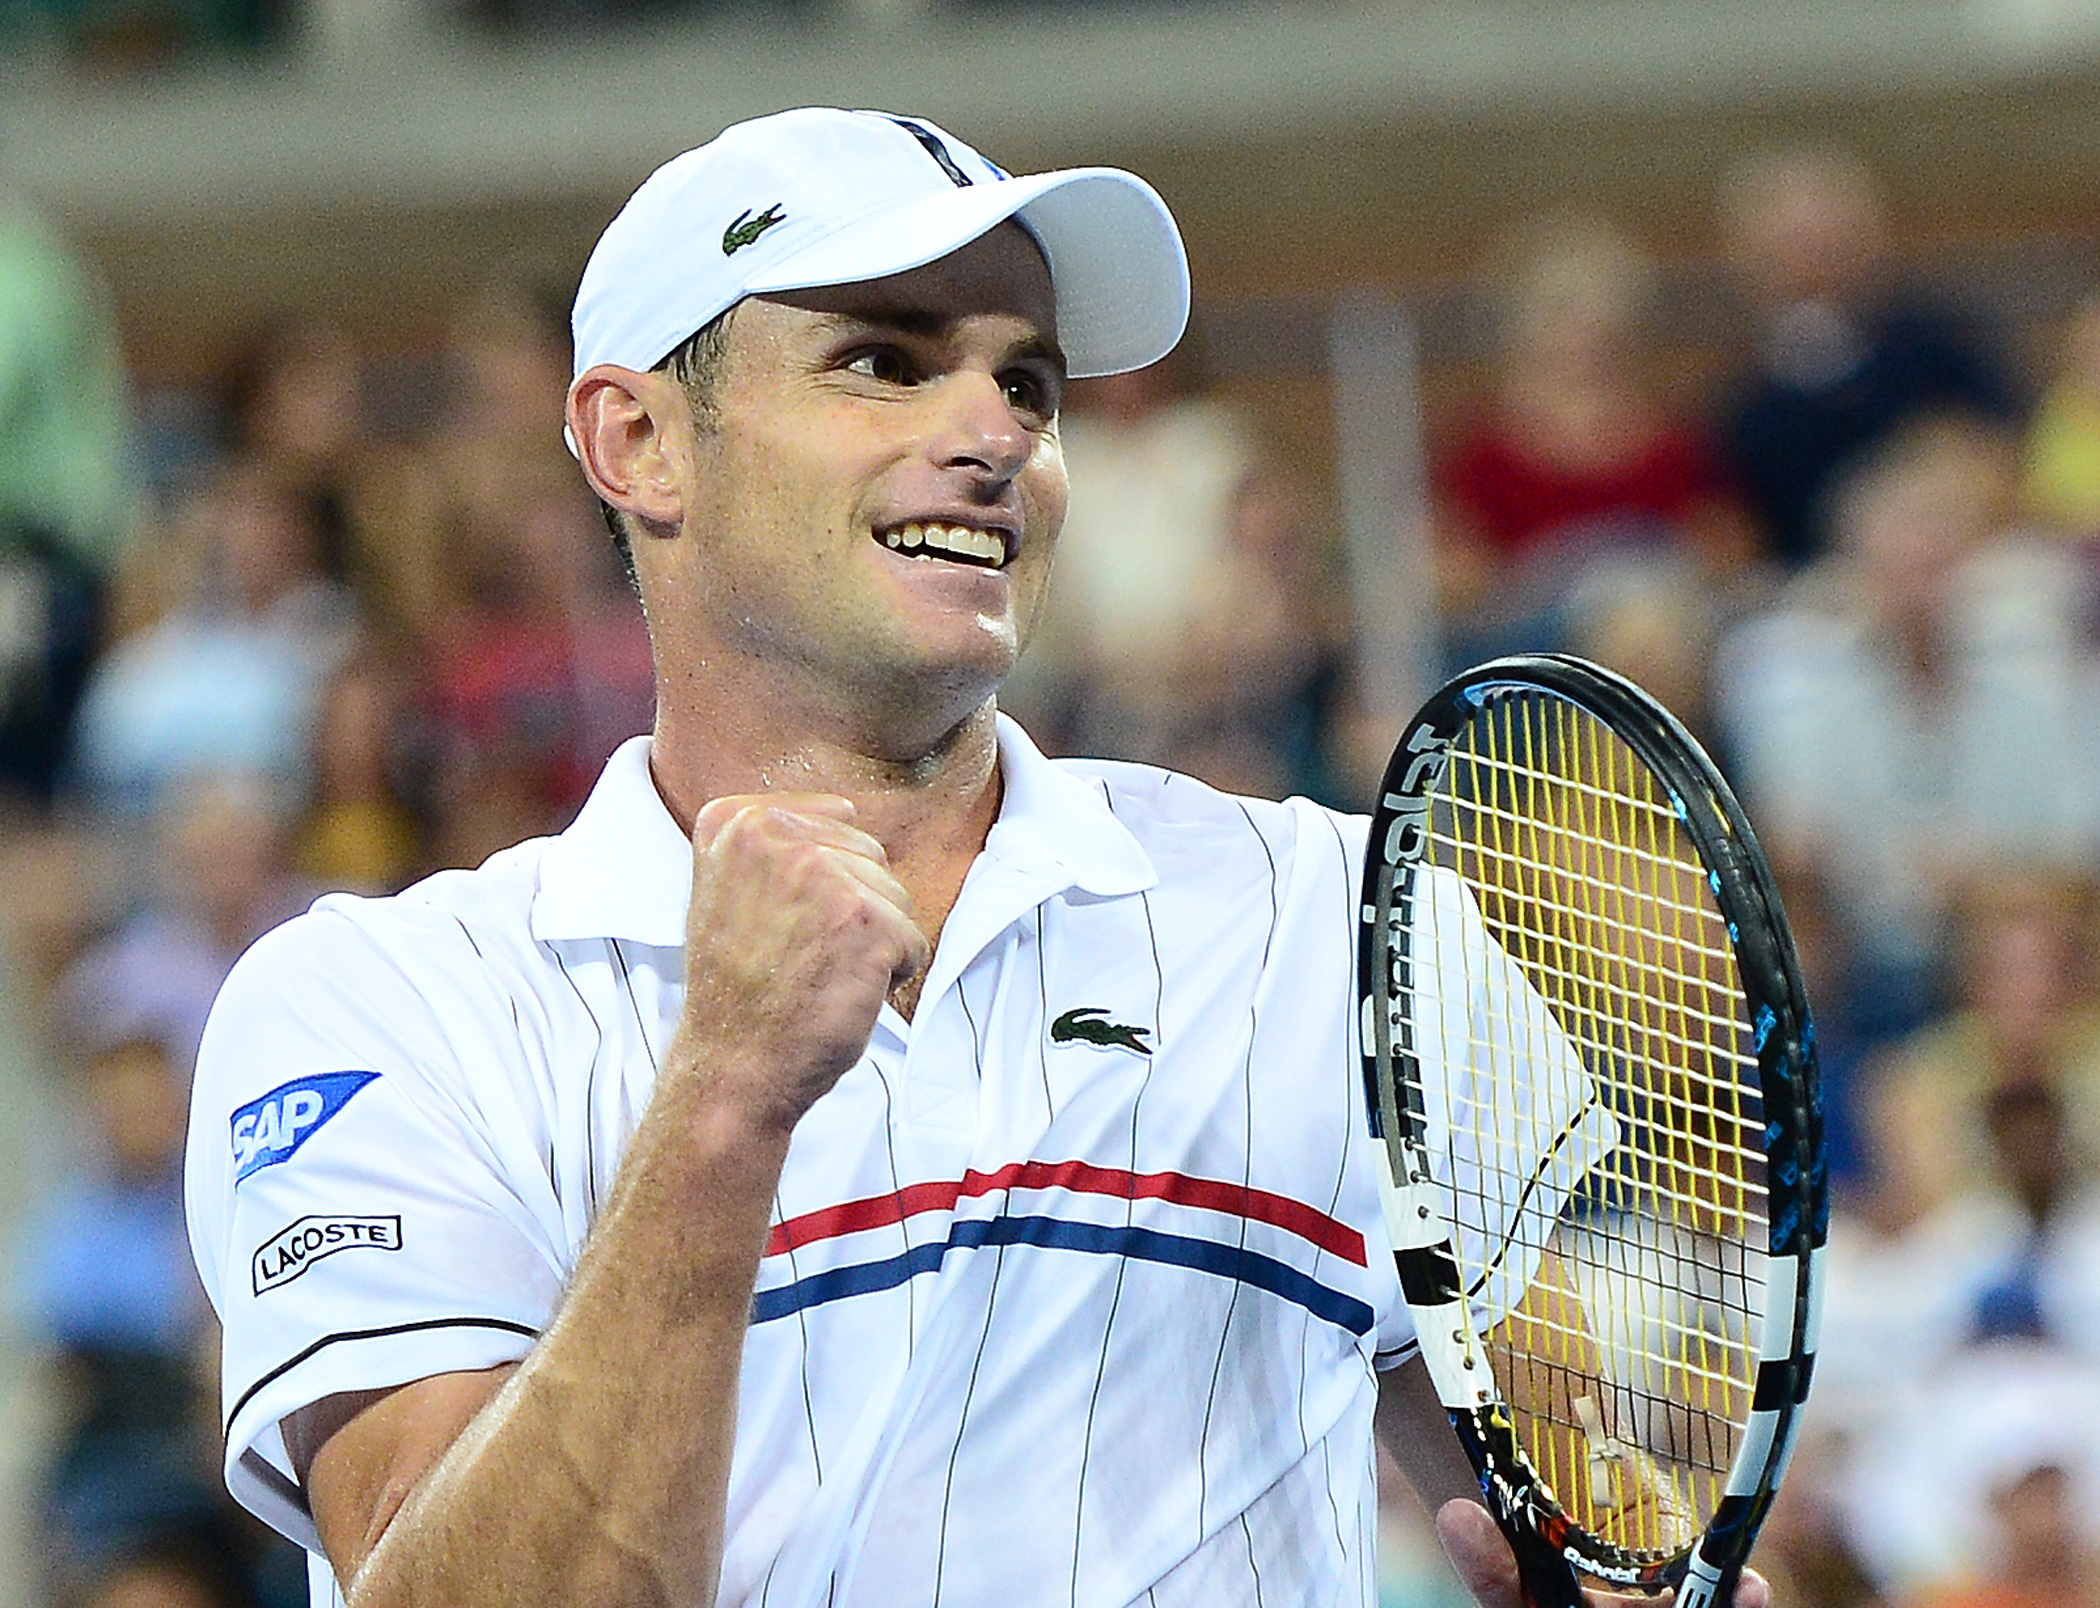 US Andy Roddick reacts after winning against Australia's Bernard Tomic during their 2012 US Open men's singles match.